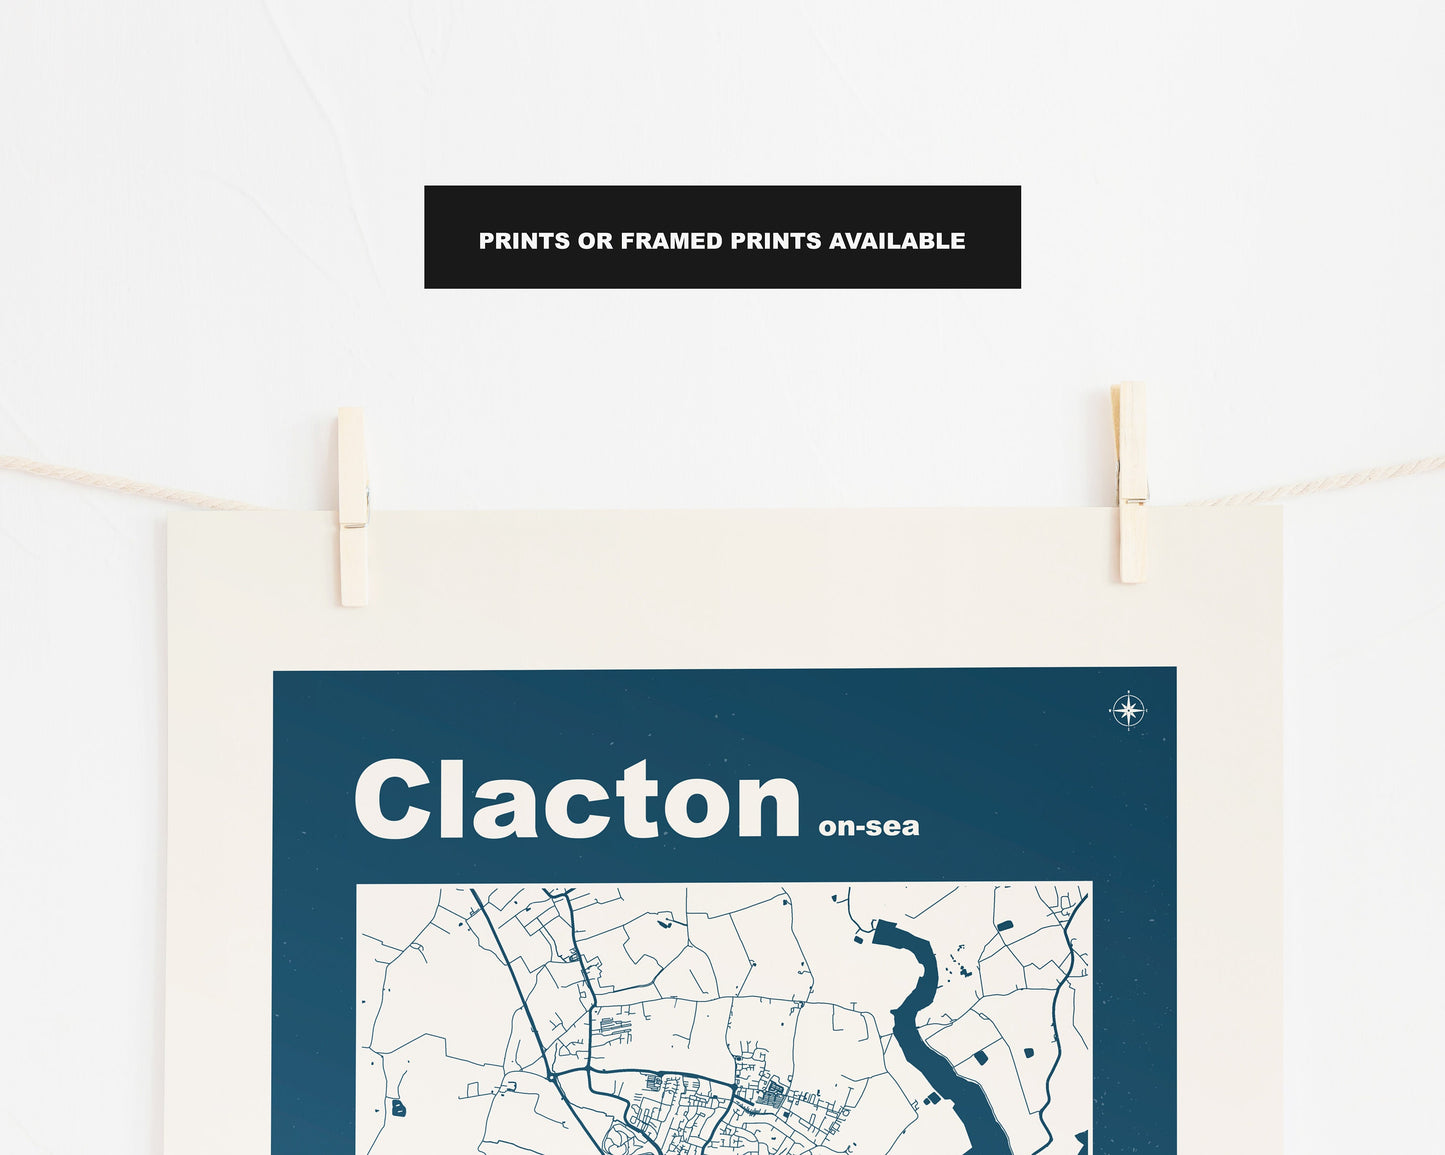 Clacton Print - Map Print - Mid Century Modern  - Retro - Vintage - Contemporary - Clacton on Sea Print - Map - Map Poster - Gift - Essex